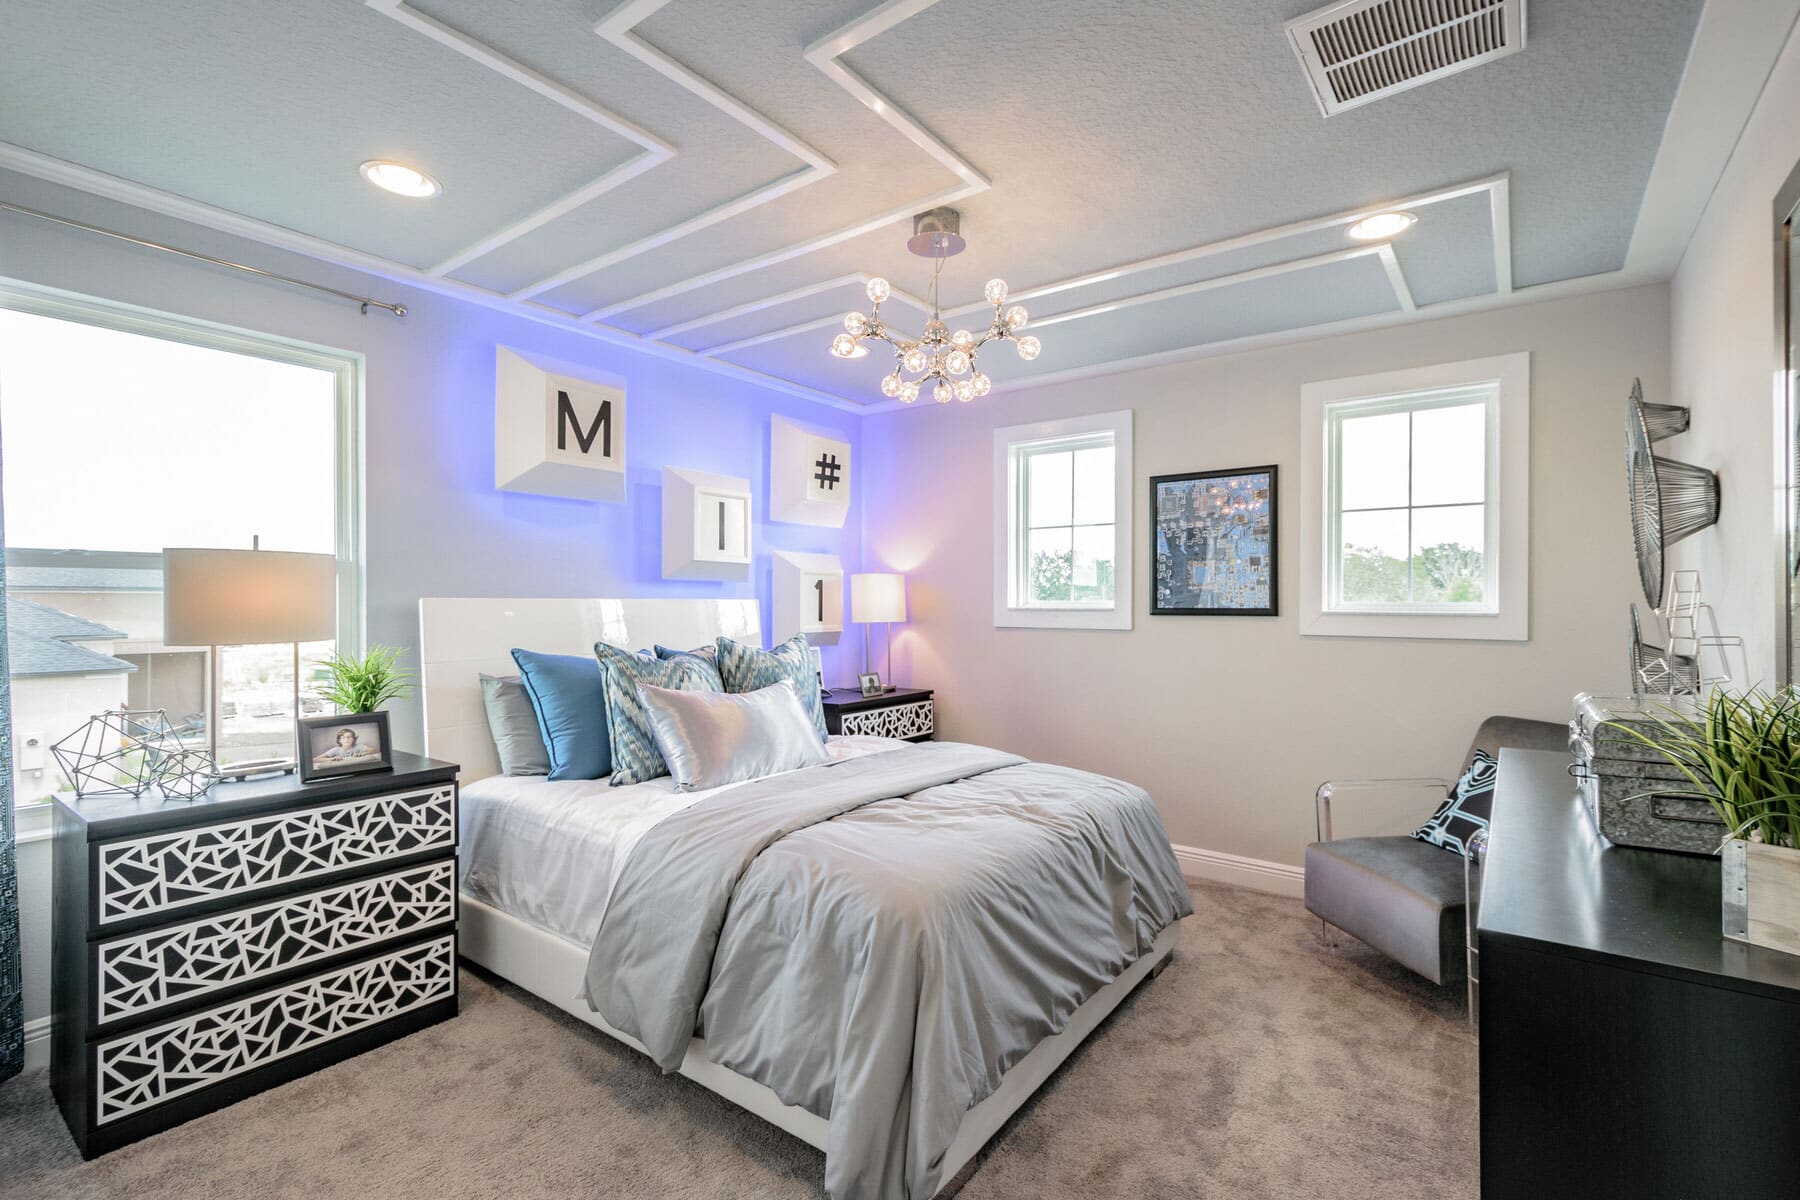 Bedroom With Metal Ceiling Light and Colored Wall Lights